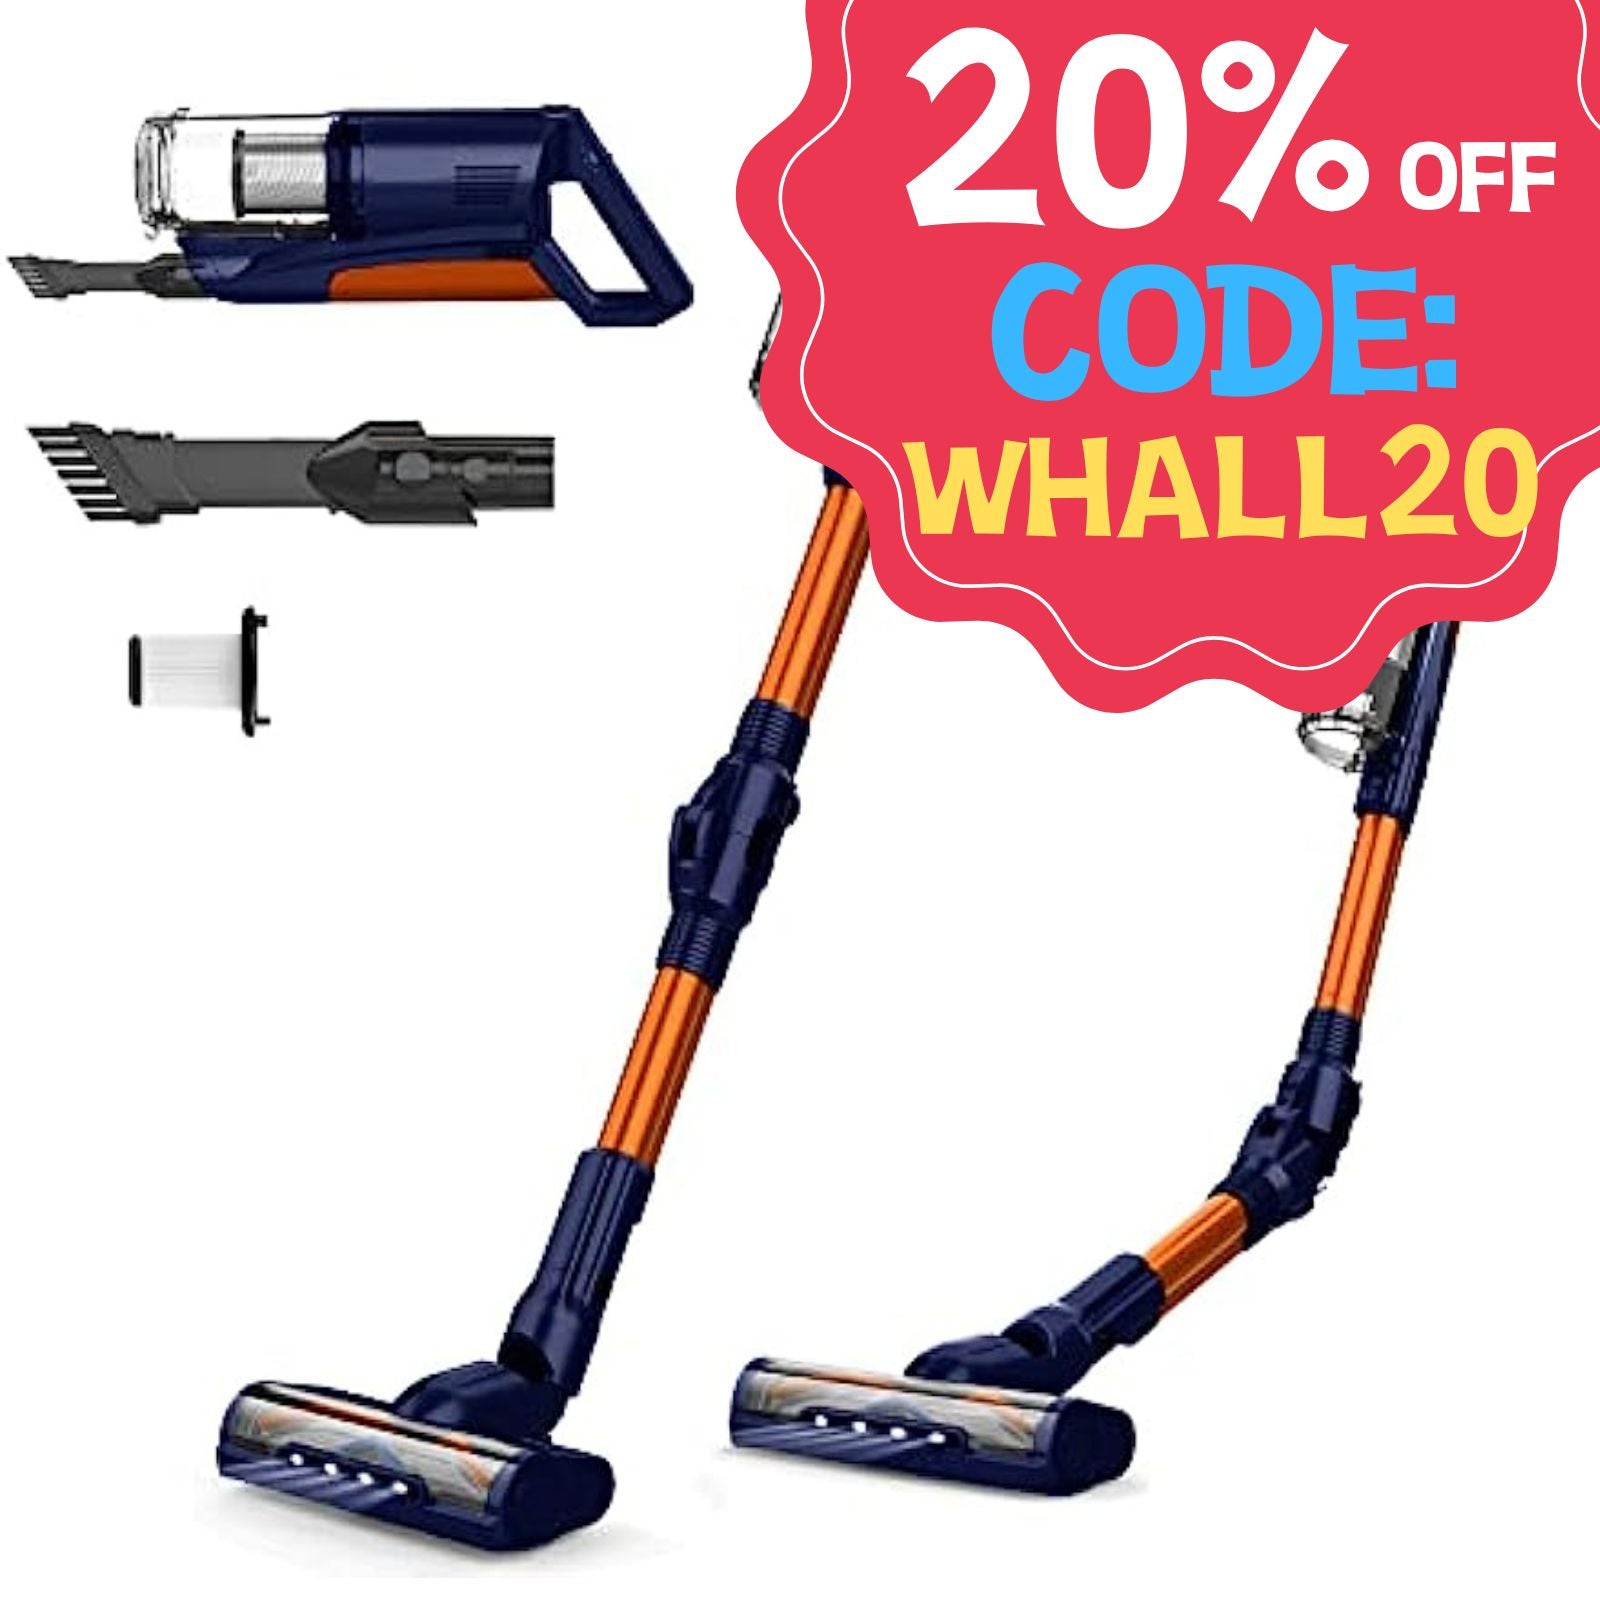 WHALL® Cordless Vacuum Cleaner, 25kPa Suction 4 in 1 Cordless Stick Vacuum Cleaner,280W Brushless Motor 55 Mins Runtime